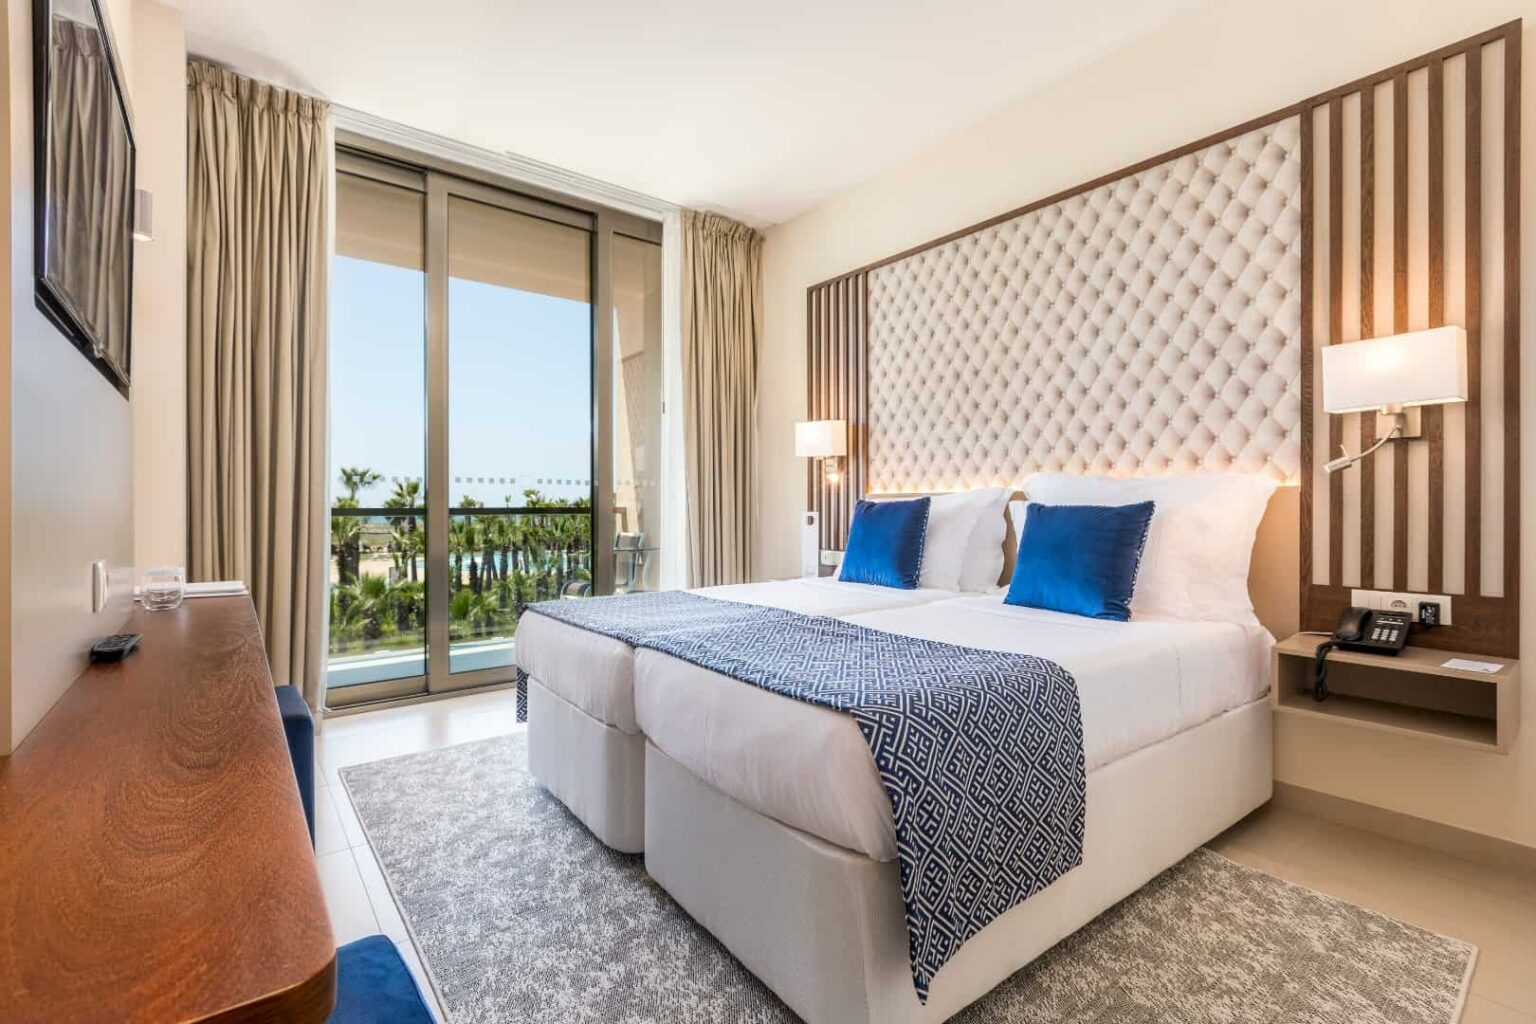 Double Room with sea view overlooking the resort pool area